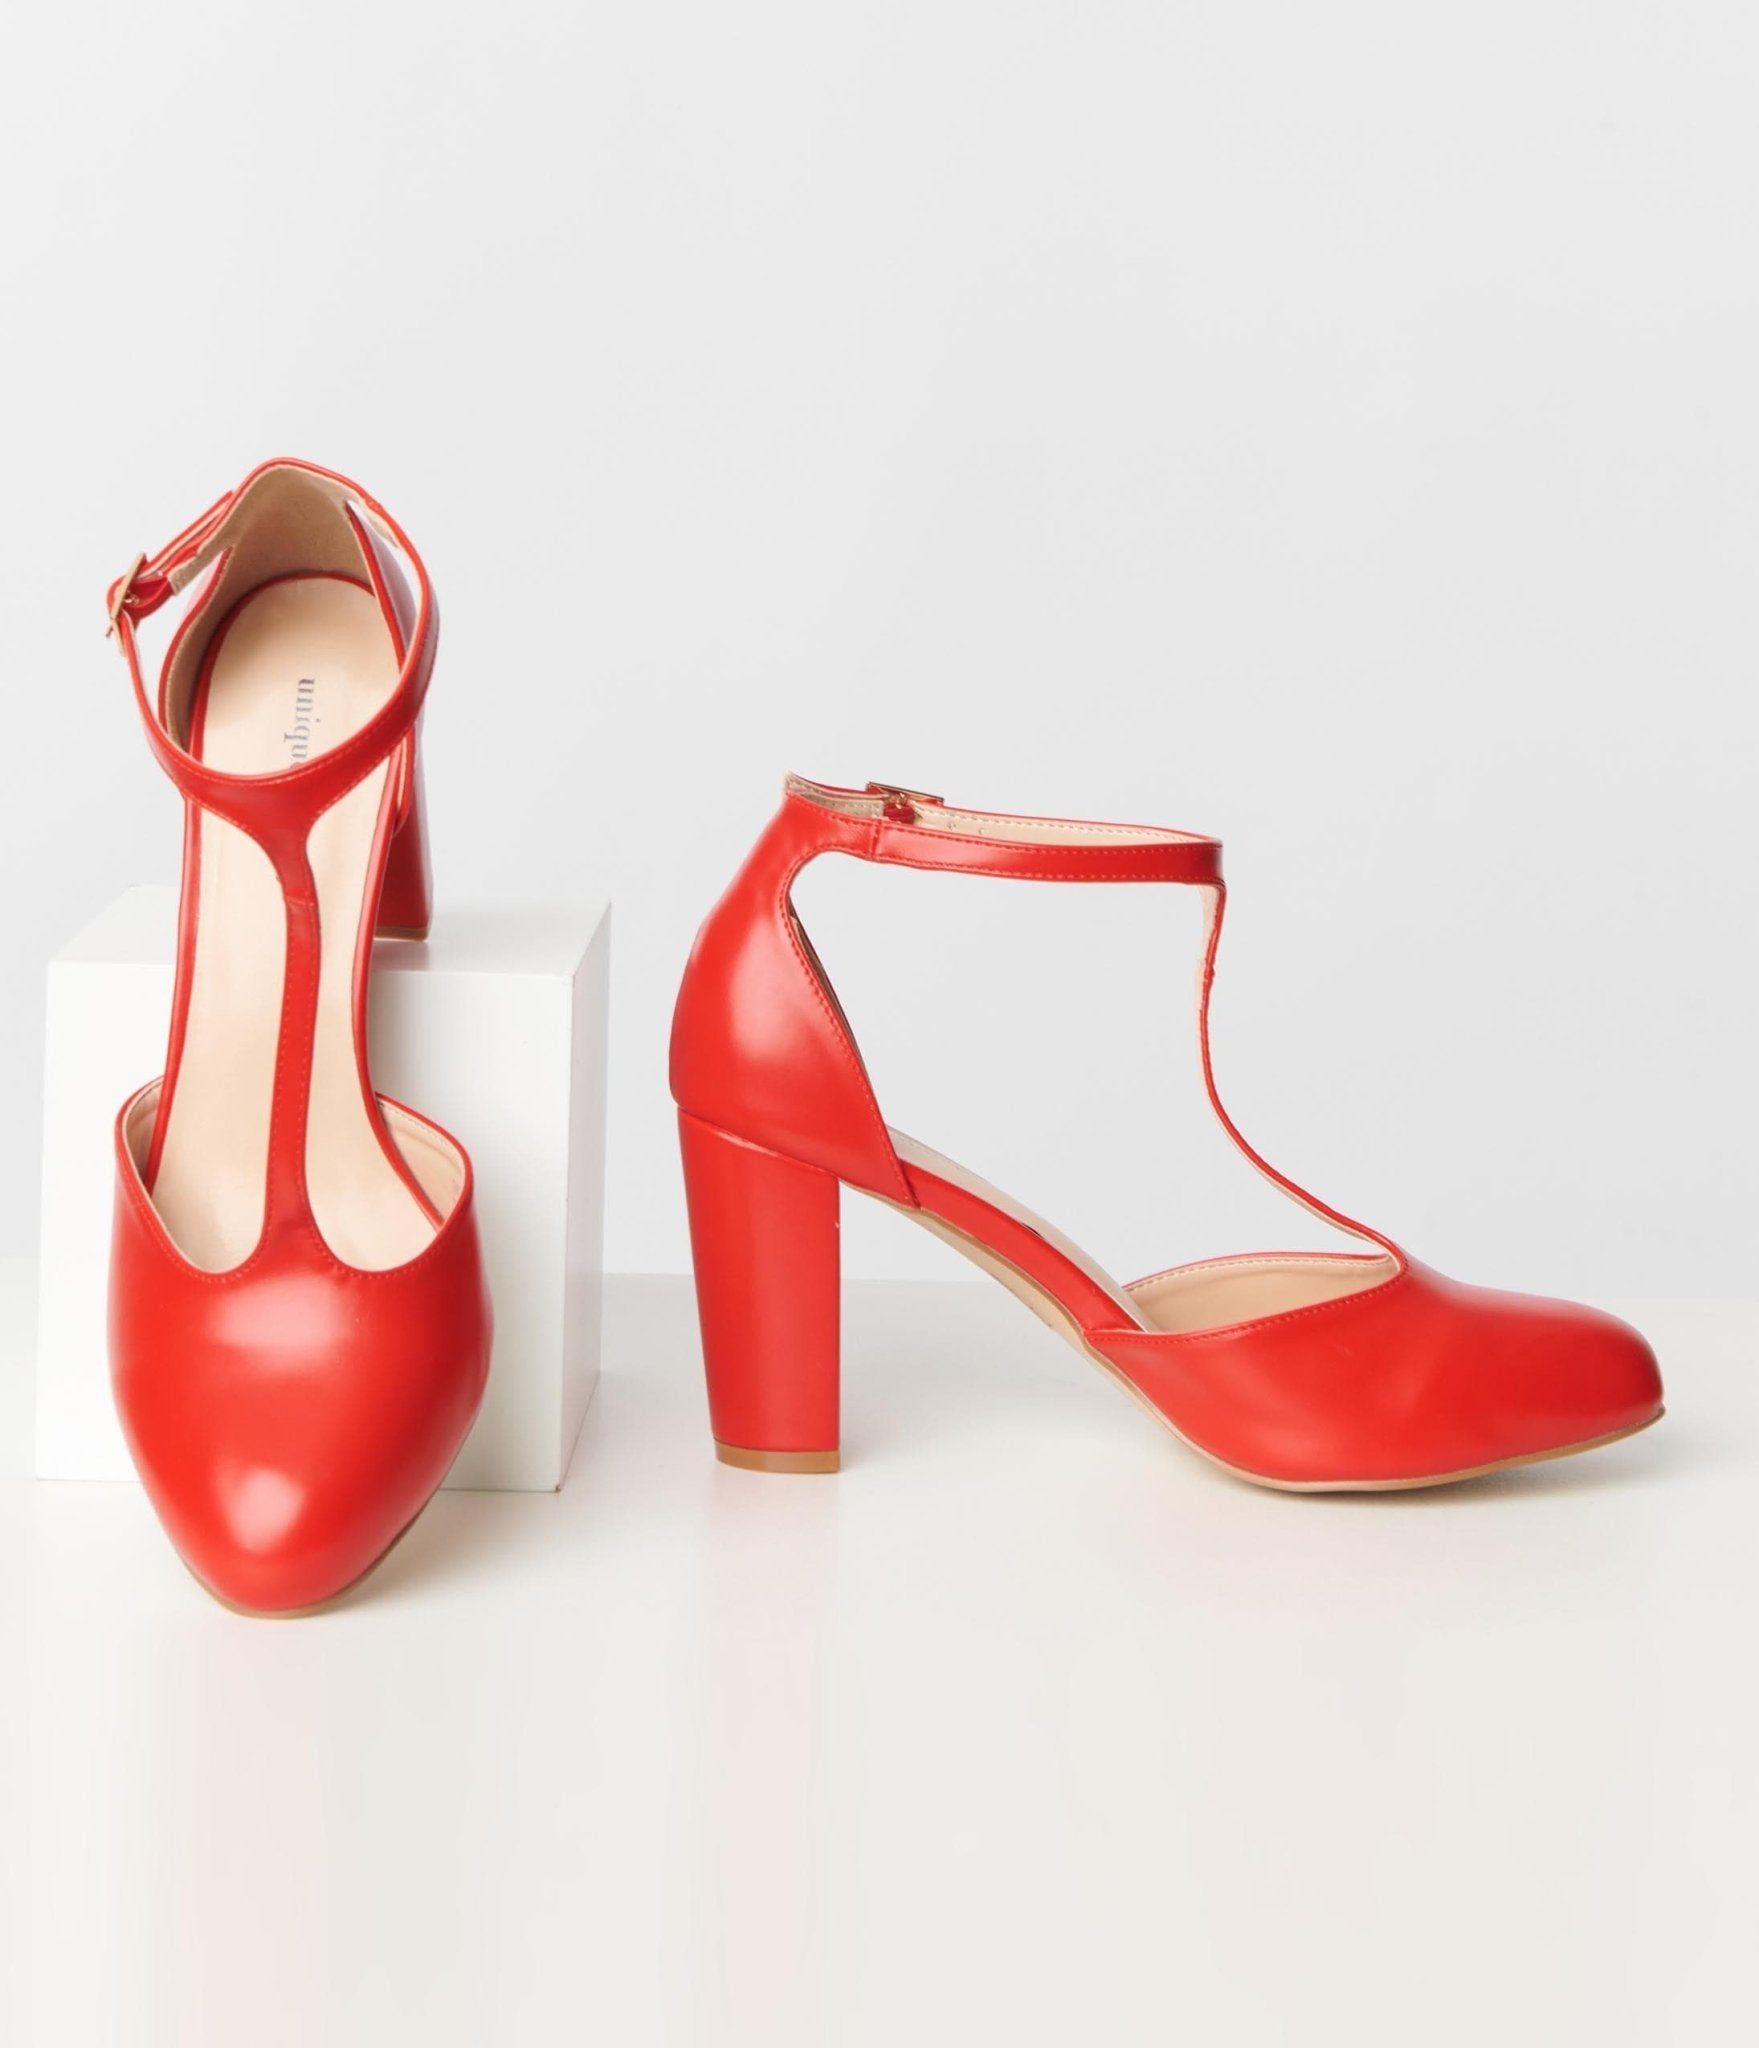 Women's Red Shoes | Explore our New Arrivals | ZARA Kosovo